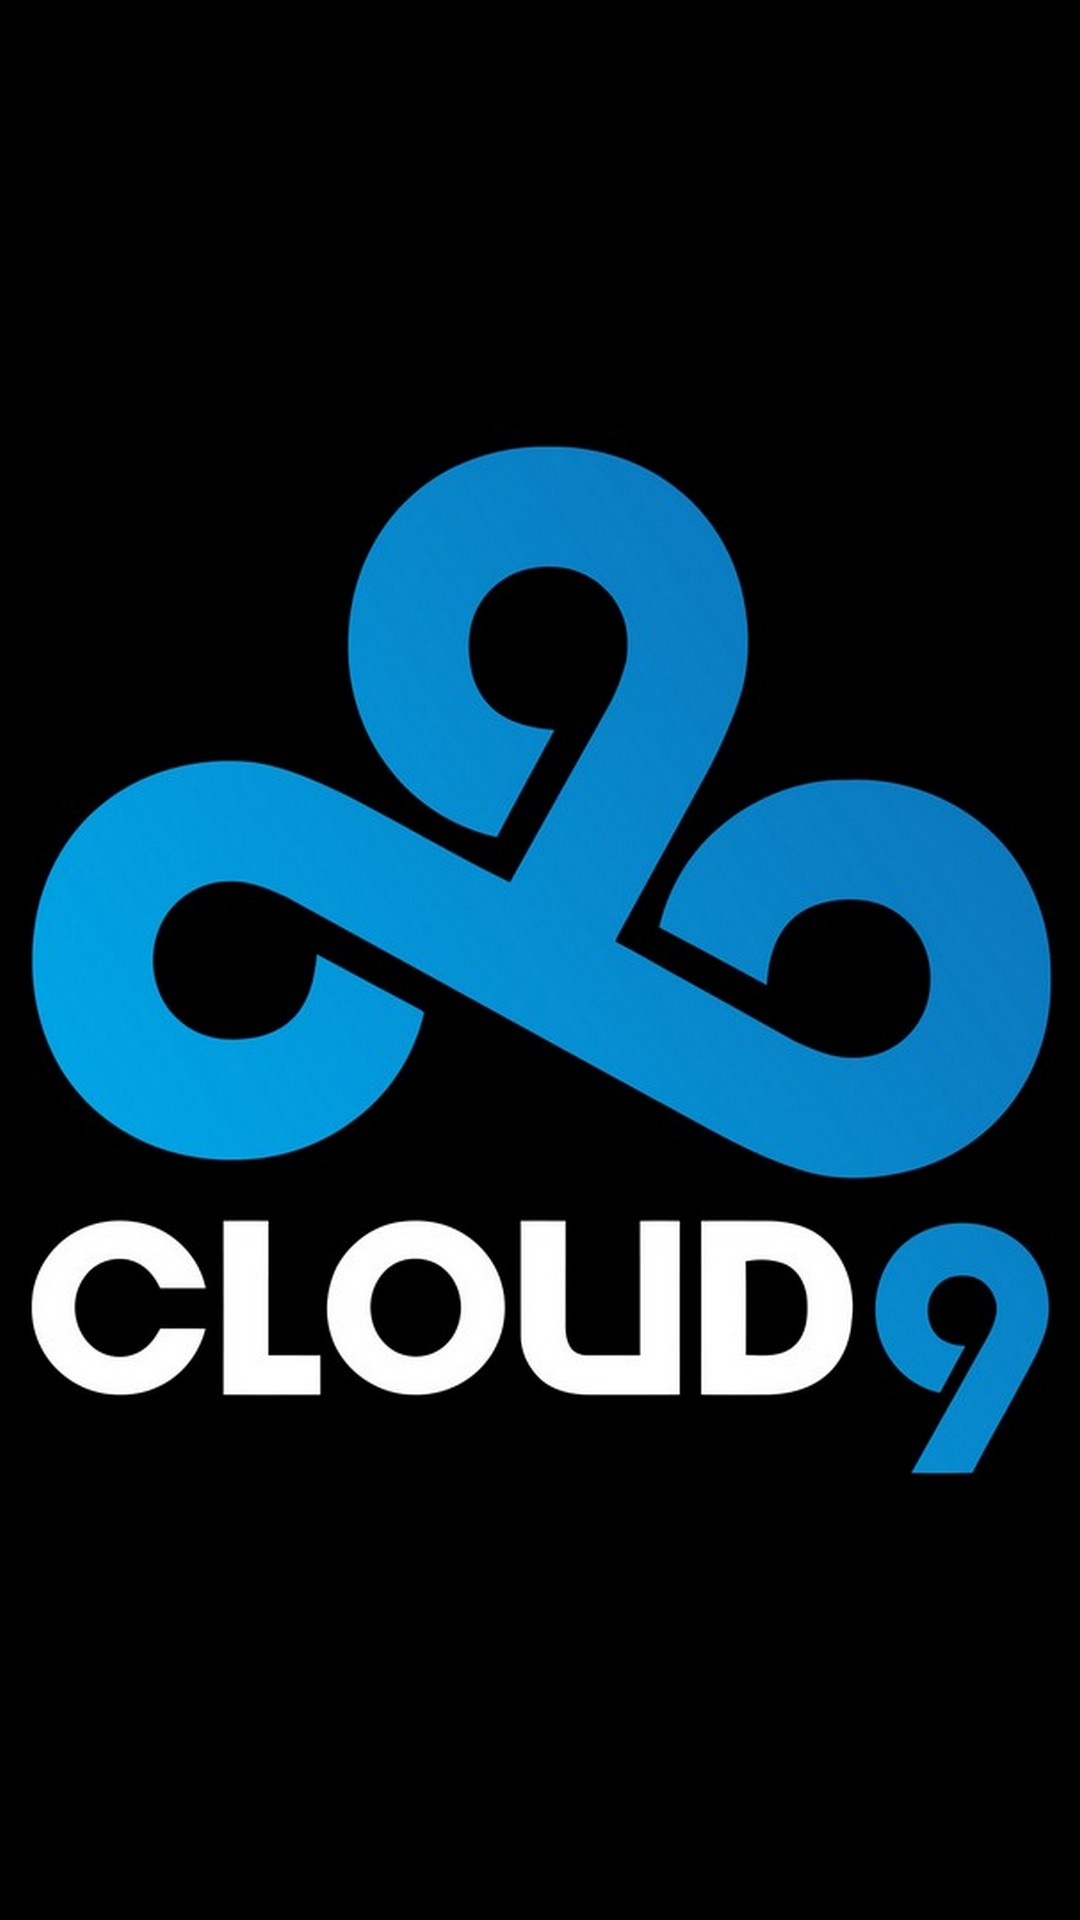 Cloud 9 Wallpaper Android with HD resolution 1080x1920